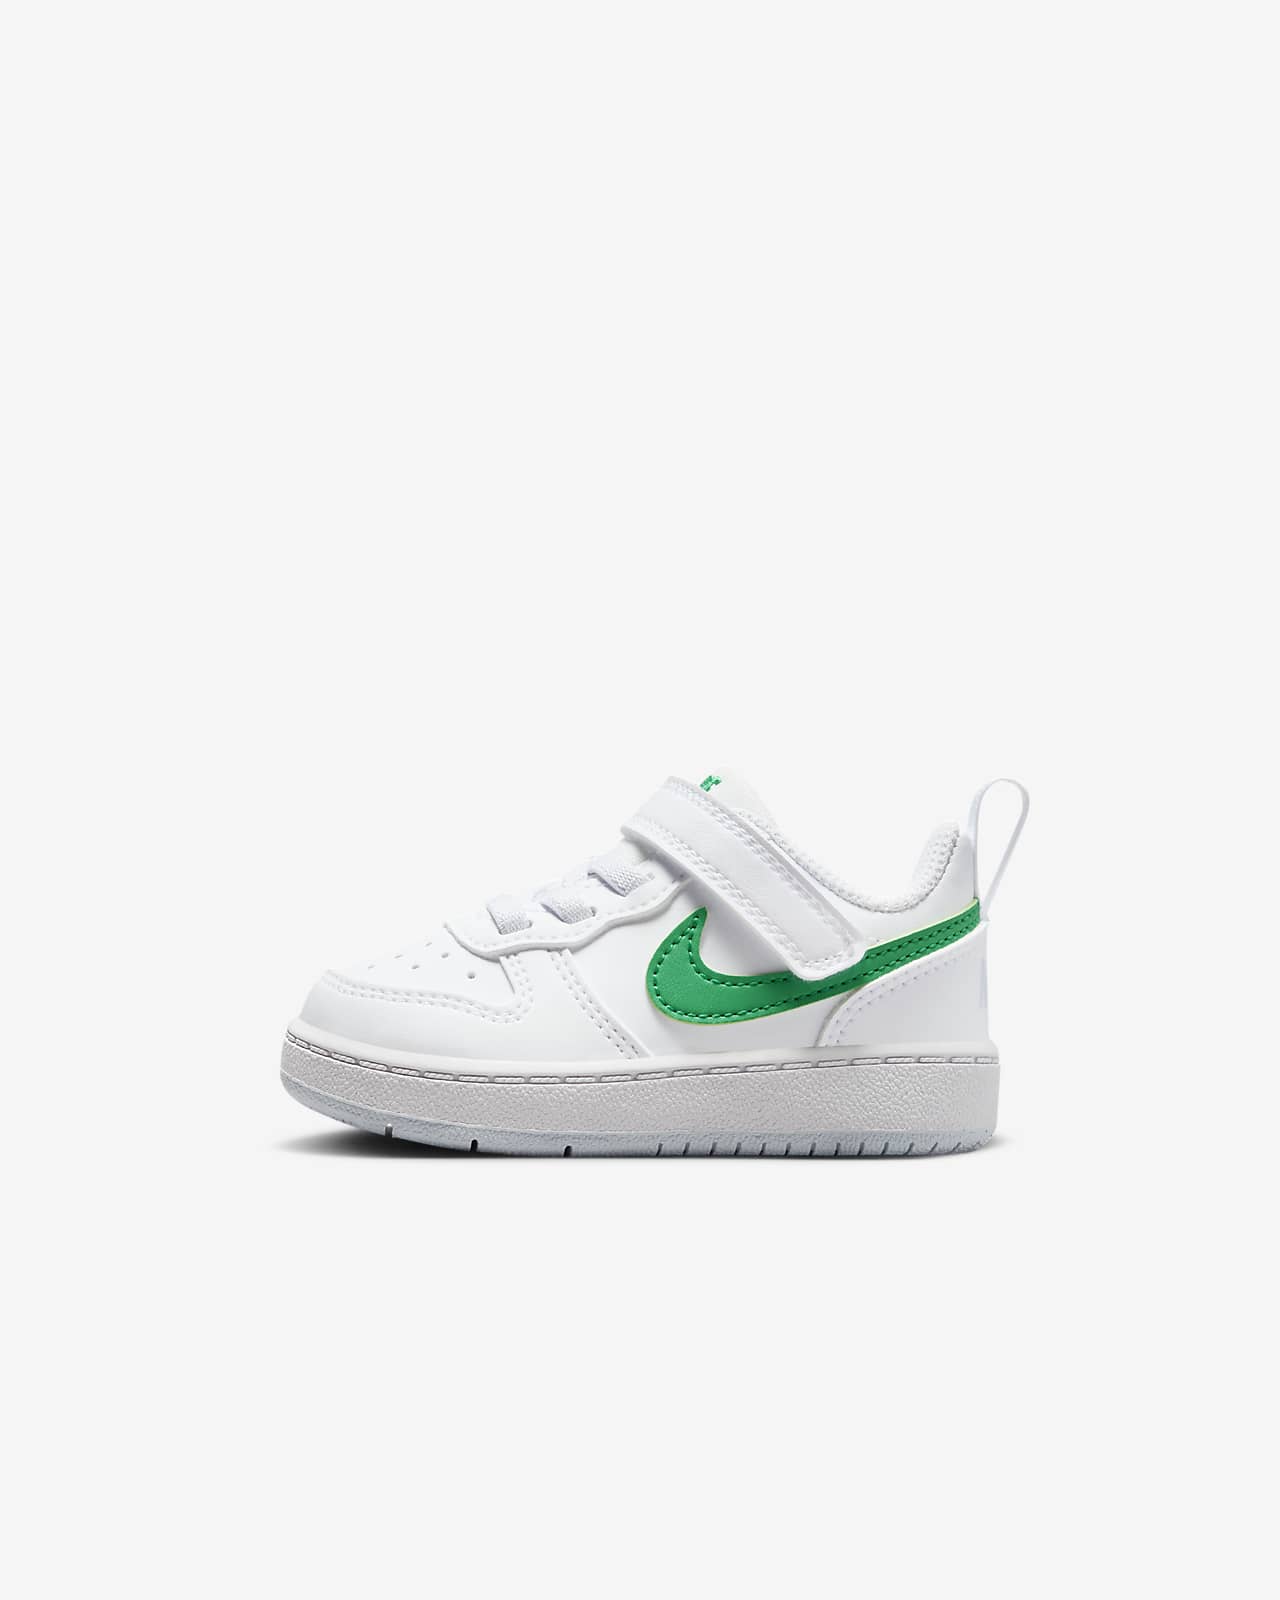 Nike Court Borough Low Recraft Baby/Toddler Shoes